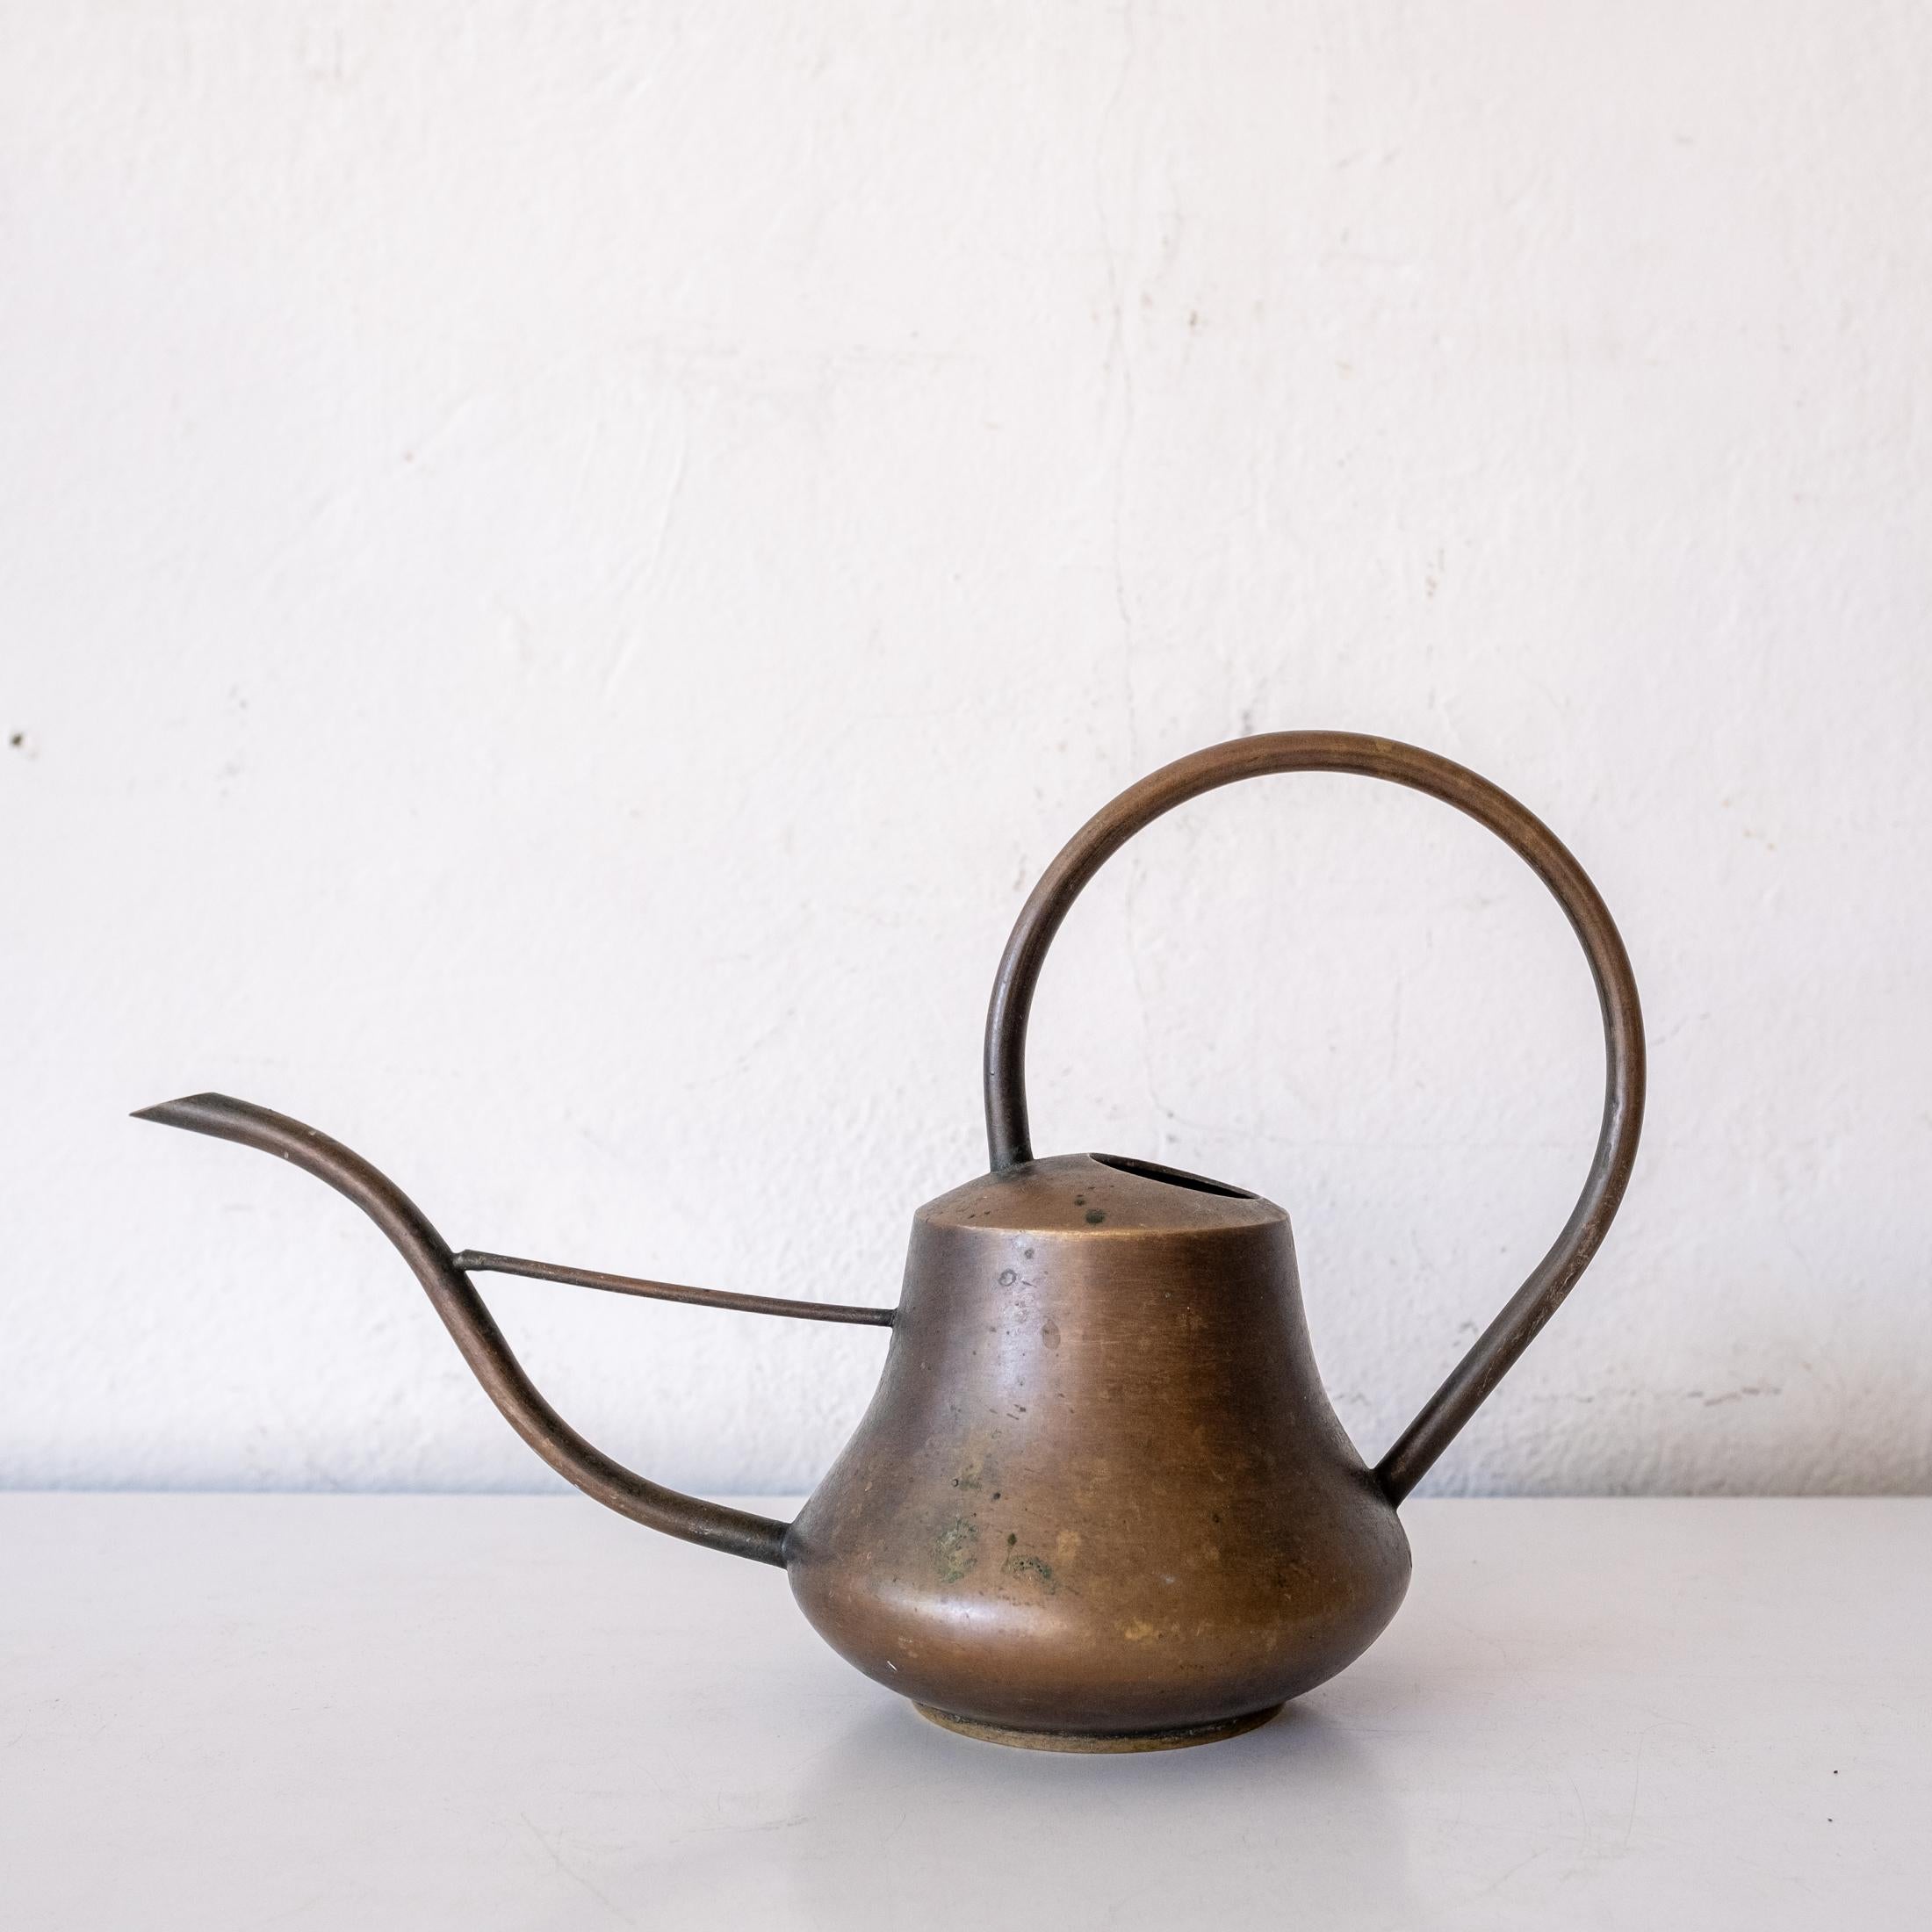 A high quality thick solid brass watering can. A functional Bauhaus aesthetic with a beautiful patina. Hand signed on the bottom. Watertight and pours nicely.